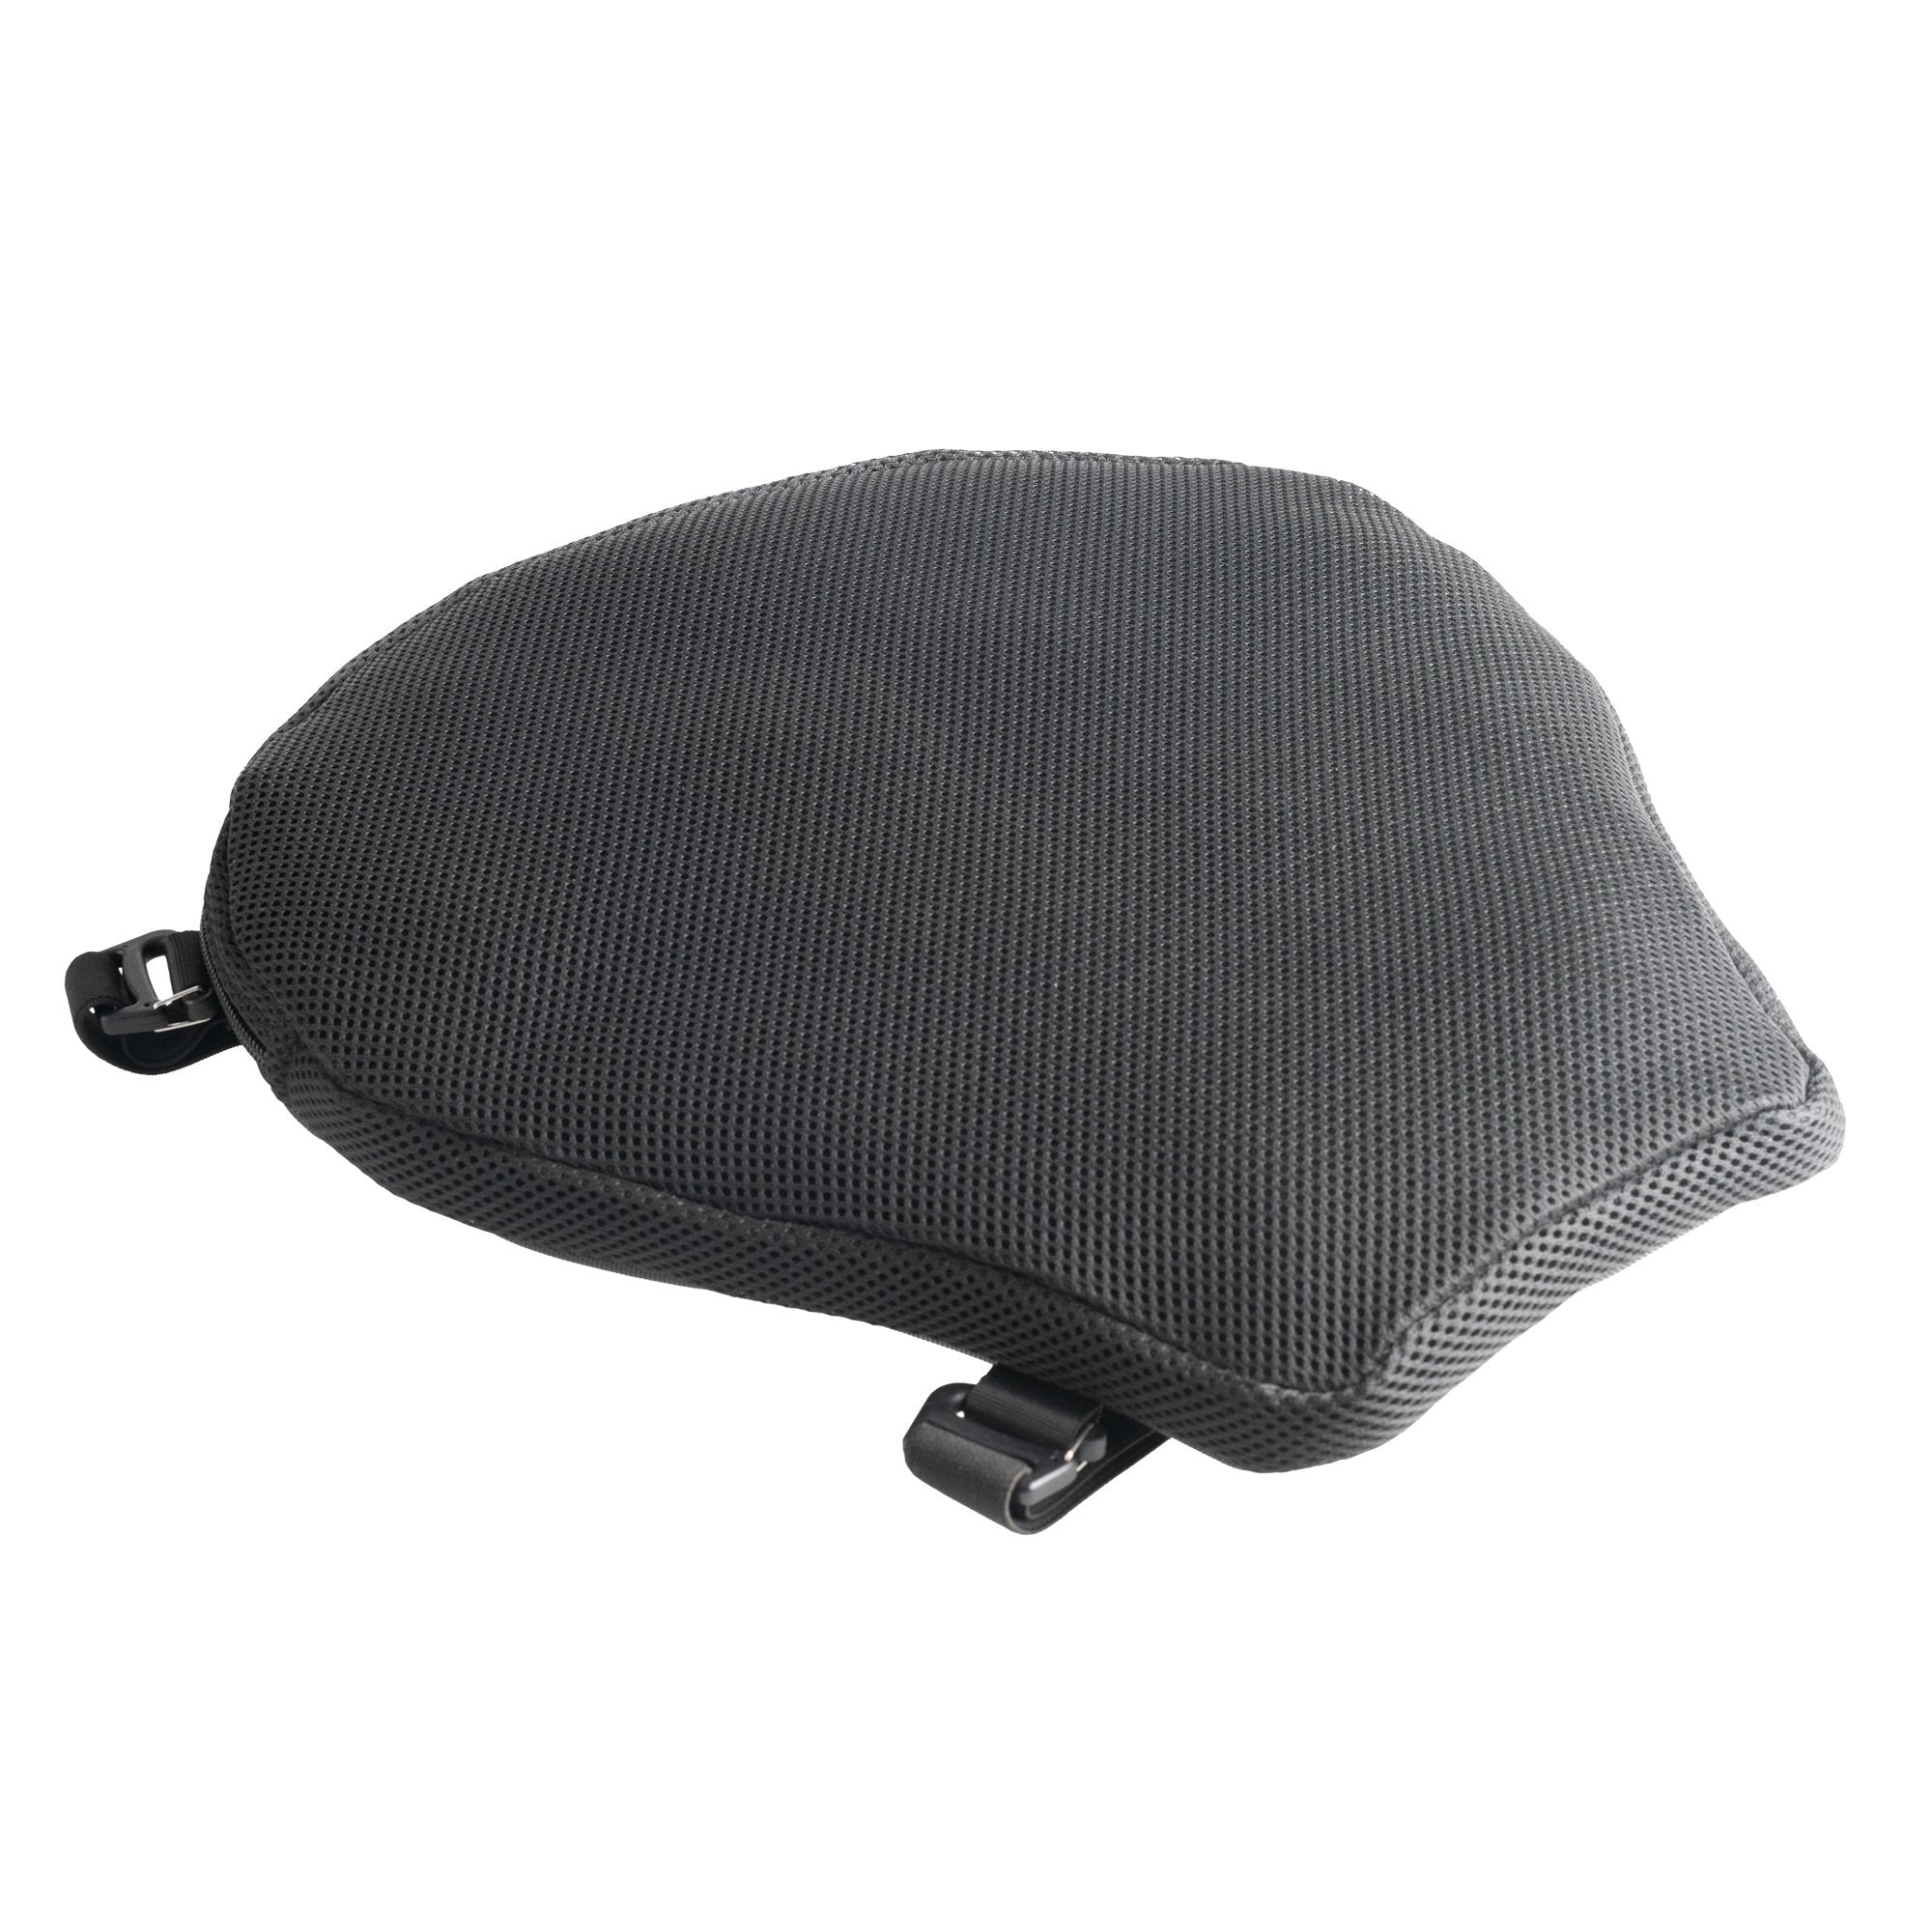 Oxford Adventure & Touring Motorcycle Air Seat, Pic